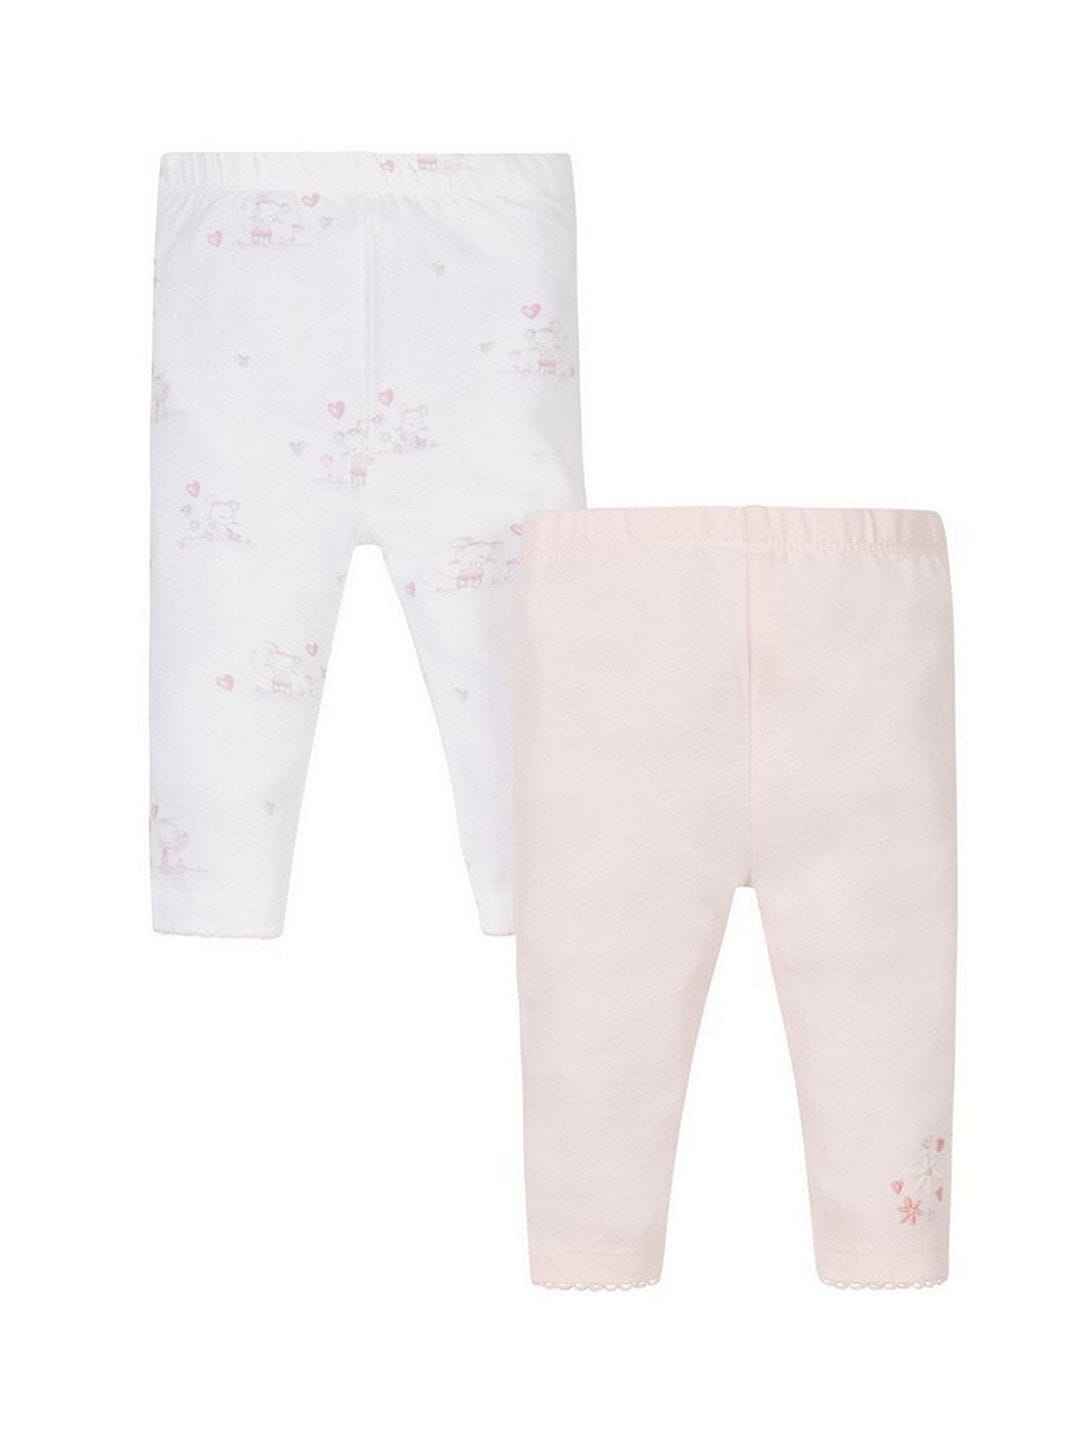 Mothercare | Multicoloured Printed Pink and Floral Leggings - Pack of 2 0